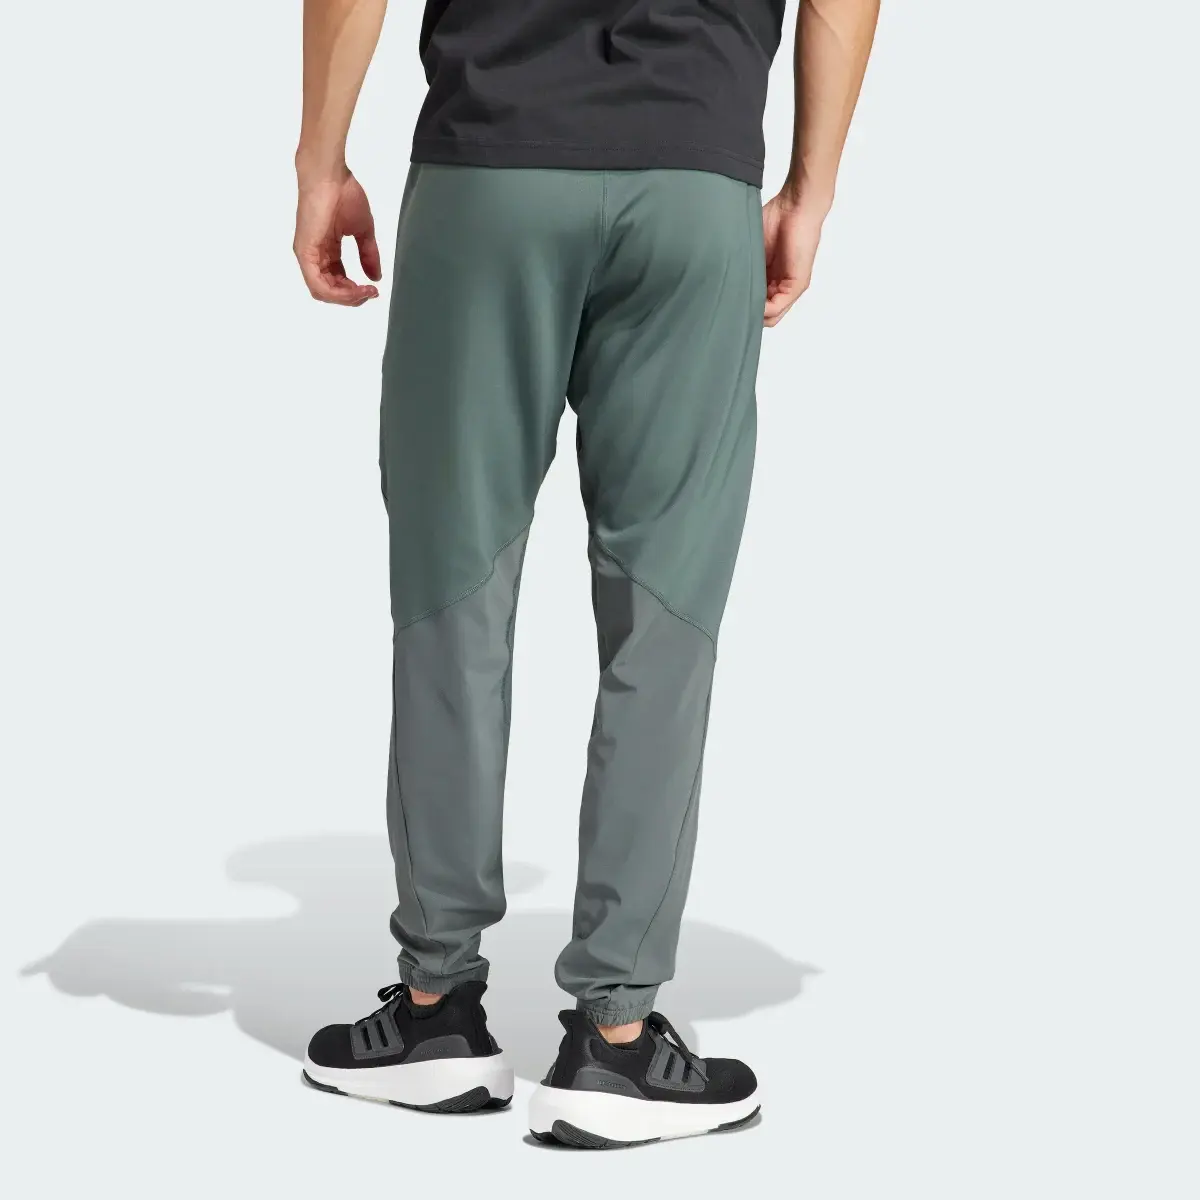 Adidas Designed for Training Workout Pants. 2